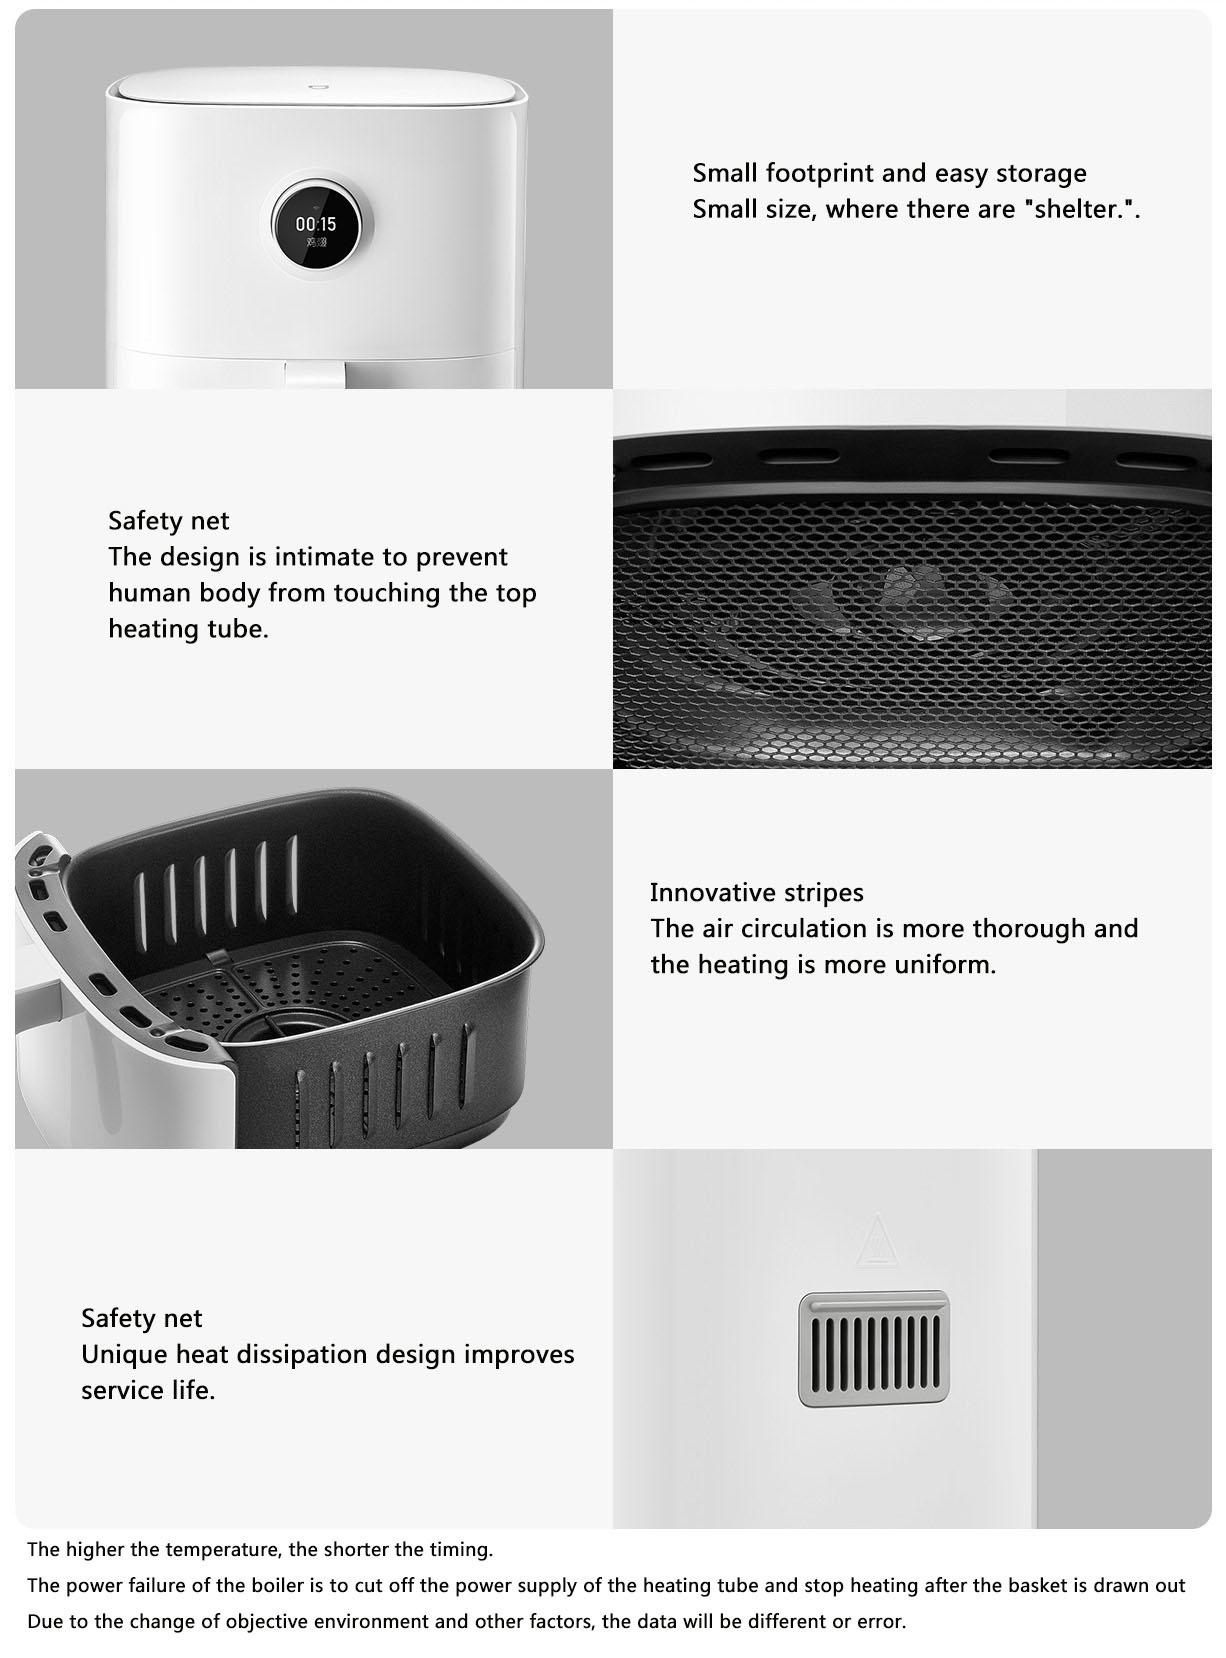 2022 Xiaomi Mijia Smart Air Fryer 3.5L Healthy Oil-free Multi-function, Food Processor, Support WIFI 24 Hours Appointment Timing